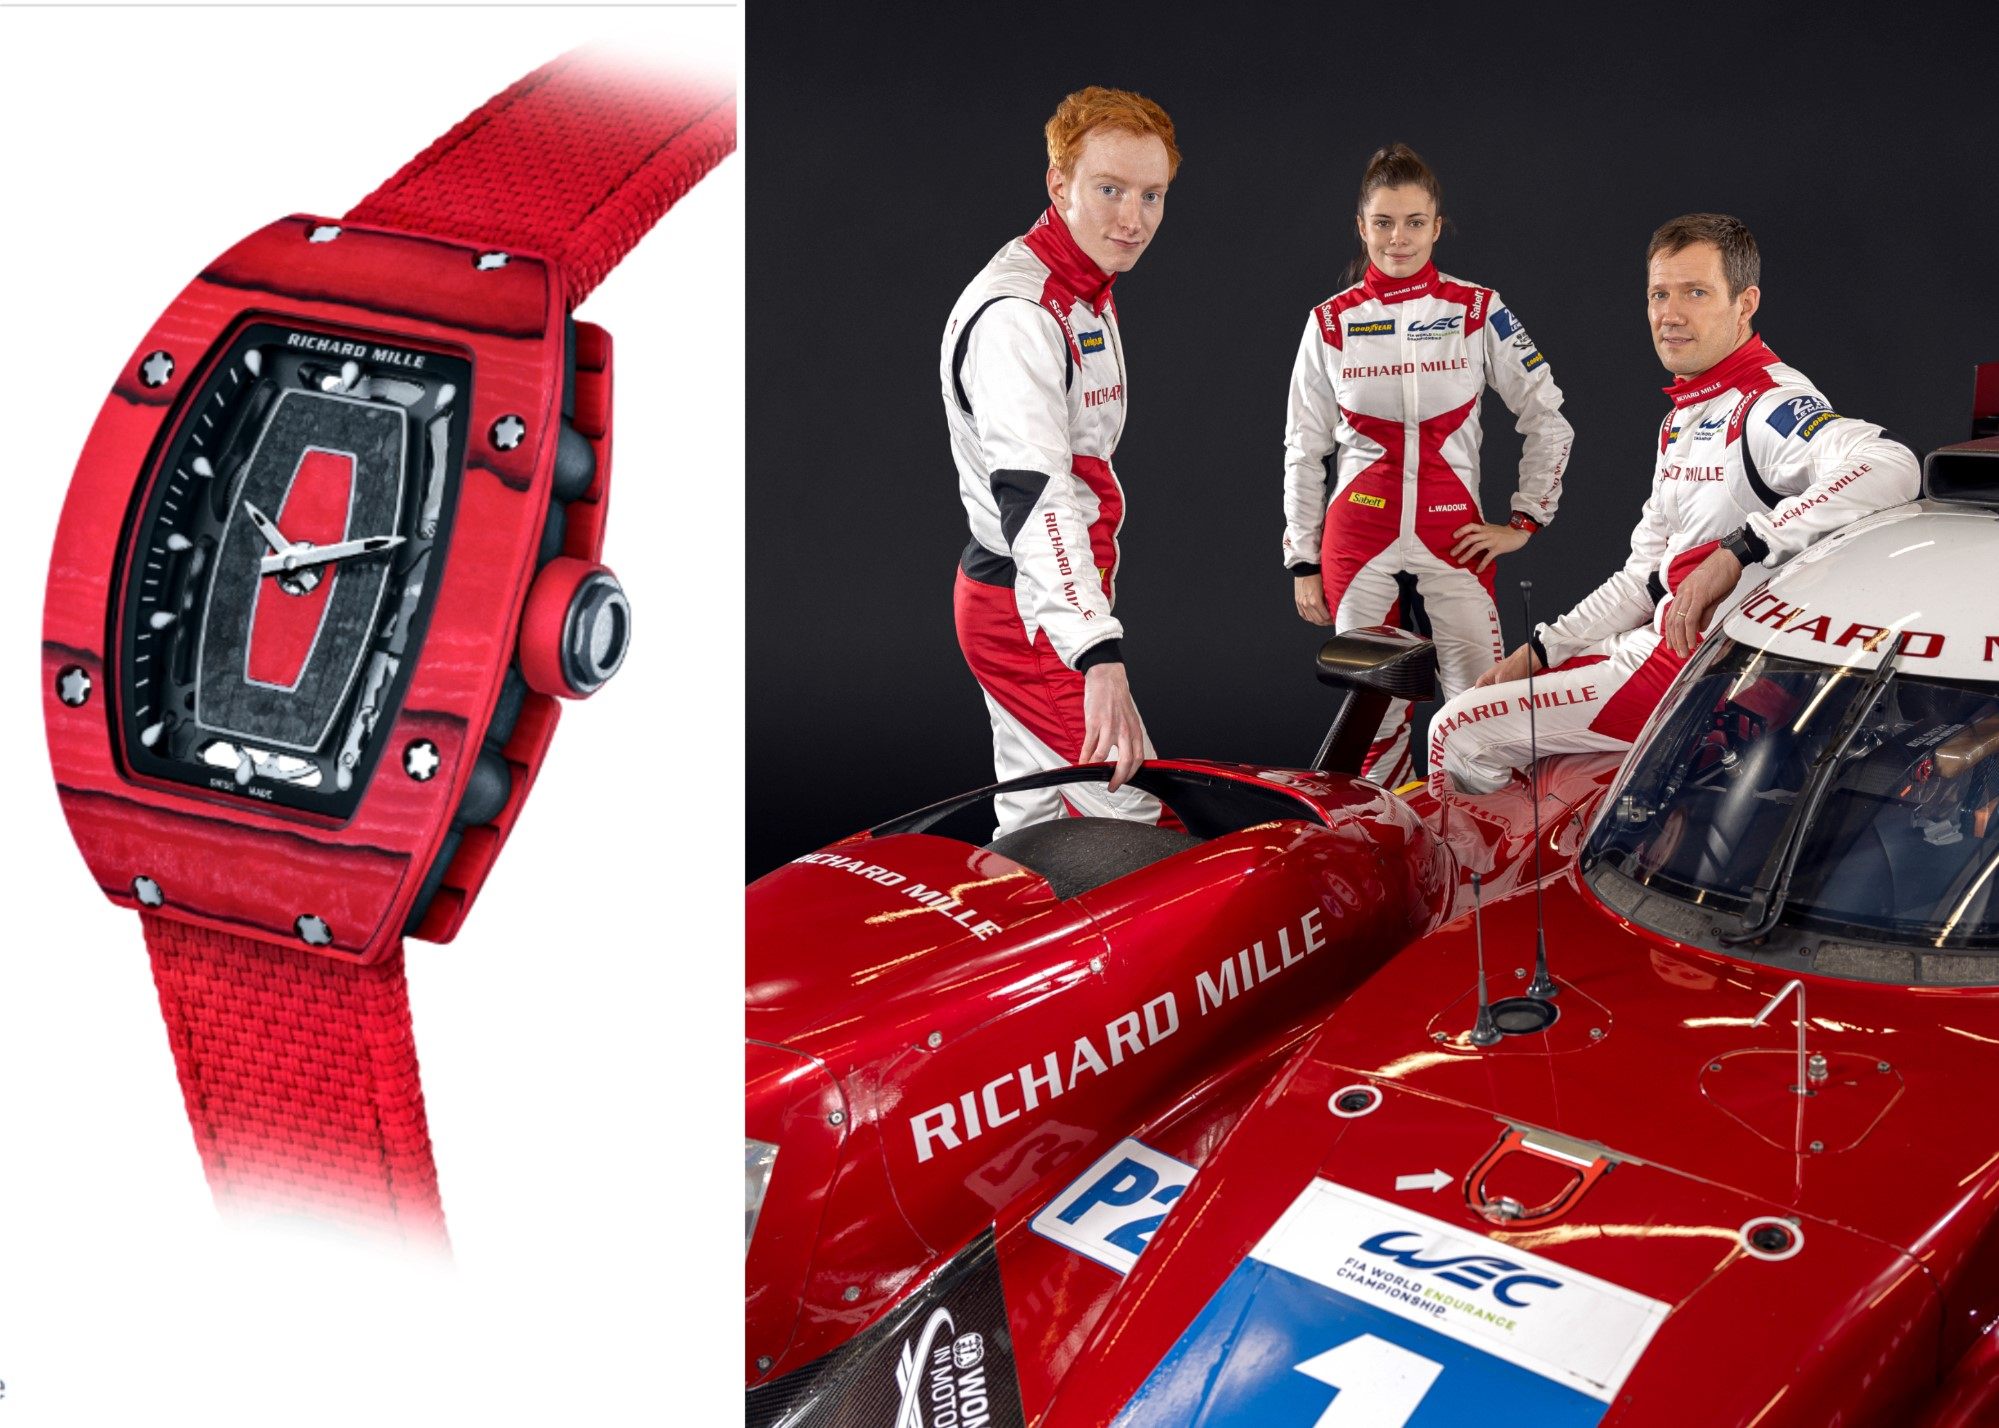 The Richard Mille Racing Team features Charles Milesi, Lilou Wadoux – who races wearing the Richard Mille RM 07-01 watch, pictured – and Sébastien Ogier for 2022. Photos: Richard Mille, Frederic Le Floc’h/DPPI